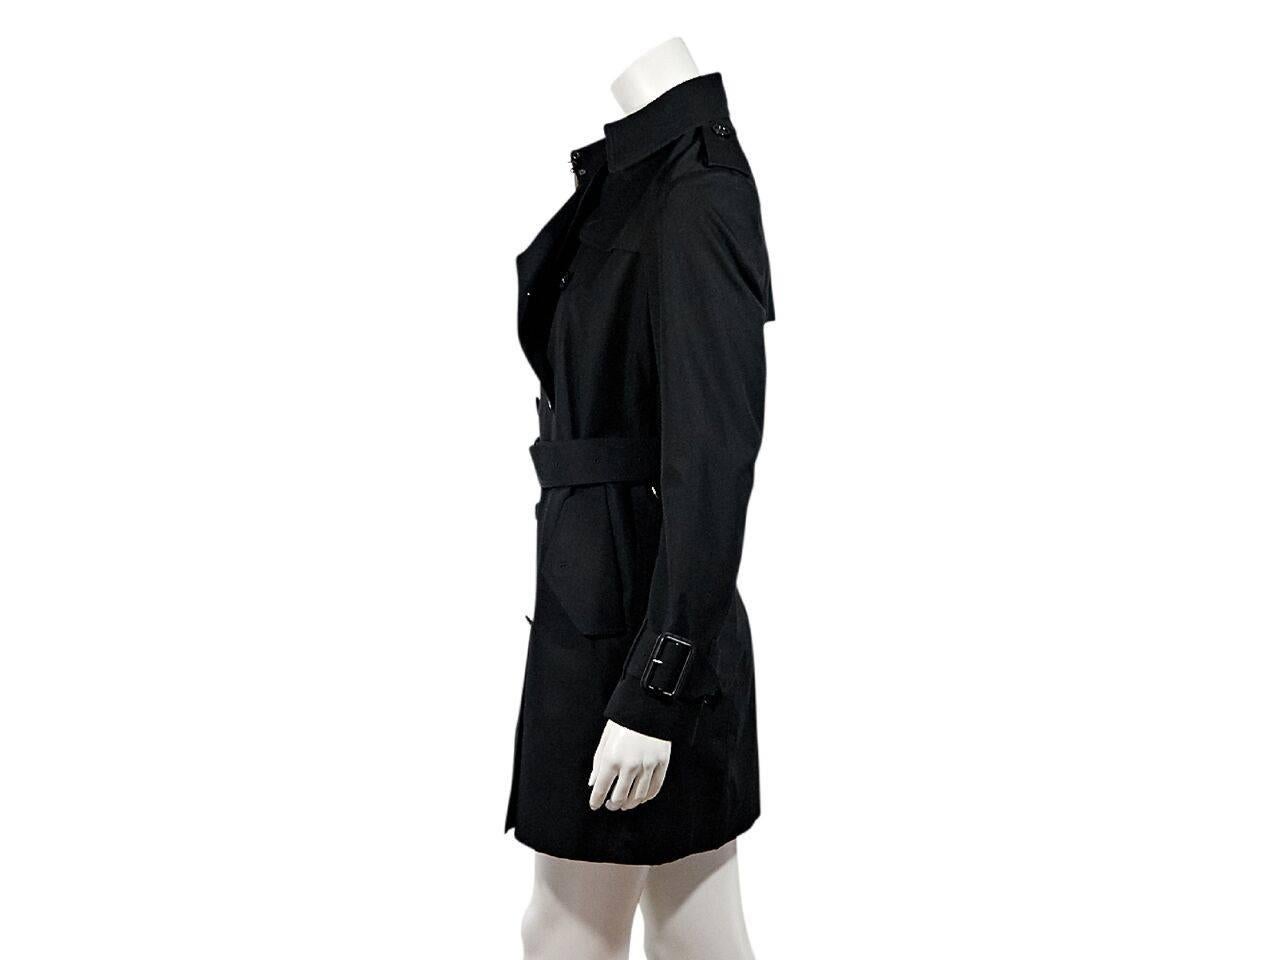 Product details:  Black trench coat by Burberry.  Spread collar.  Notched lapel.  Button shoulder epaulettes.  Long sleeves.  Adjustable belted cuffs.  Double-breasted button closure.  Adjustable belted waist.  Waist button flap pockets.  Back storm